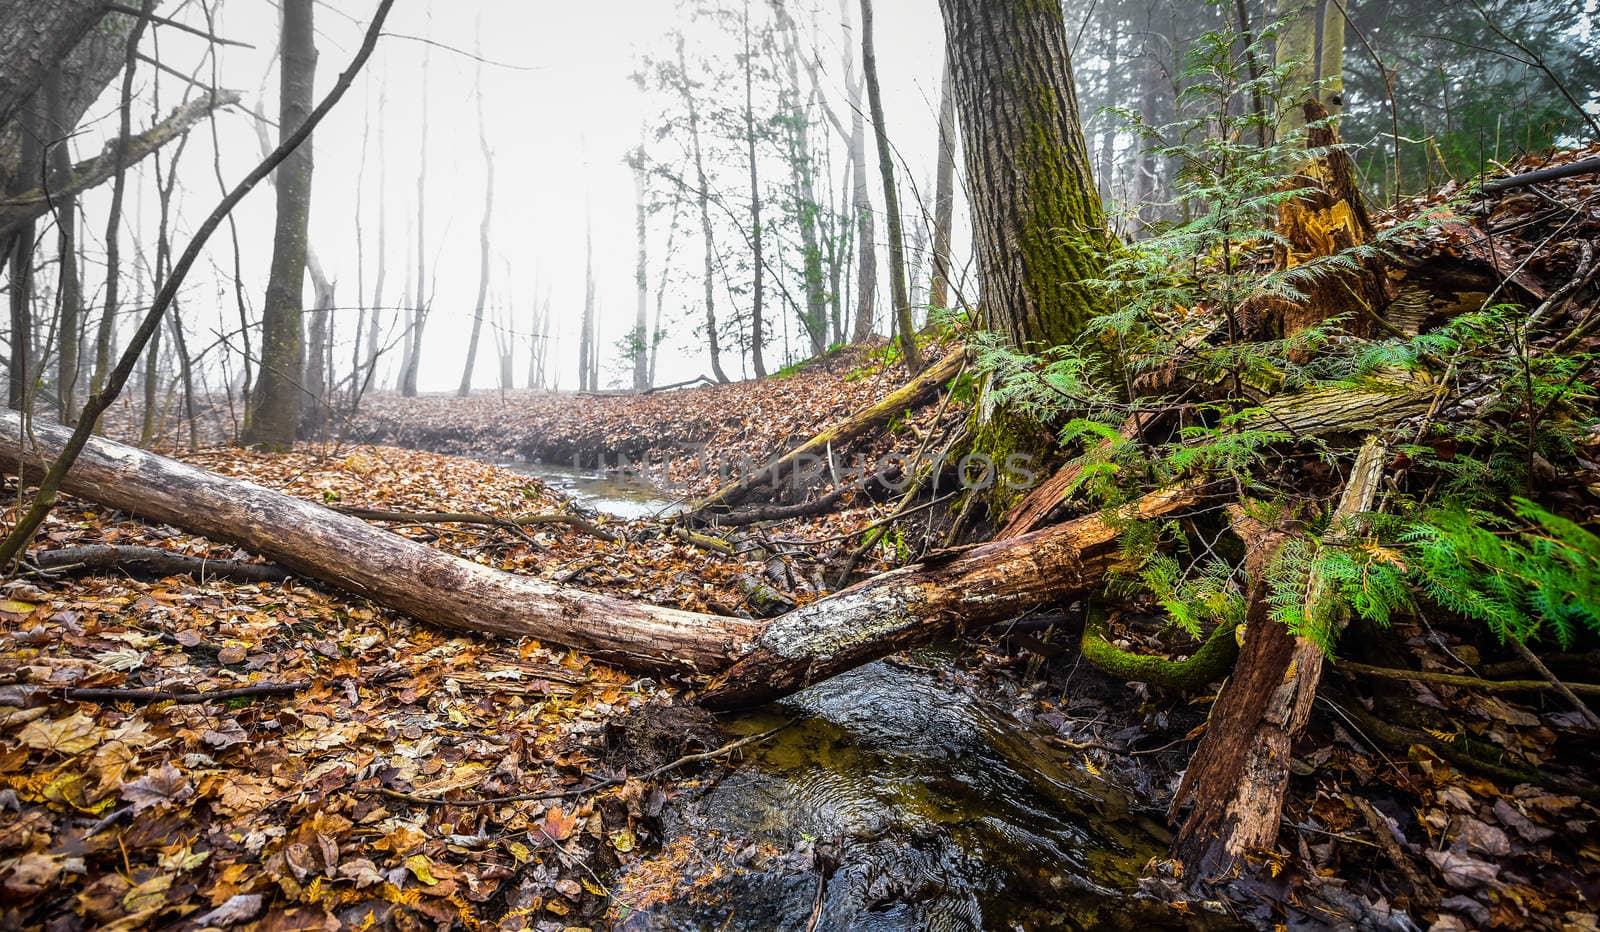 Stream of water running past a broken fallen tree by green shrub in an autum woods in heavy fog in Ontario Canada.